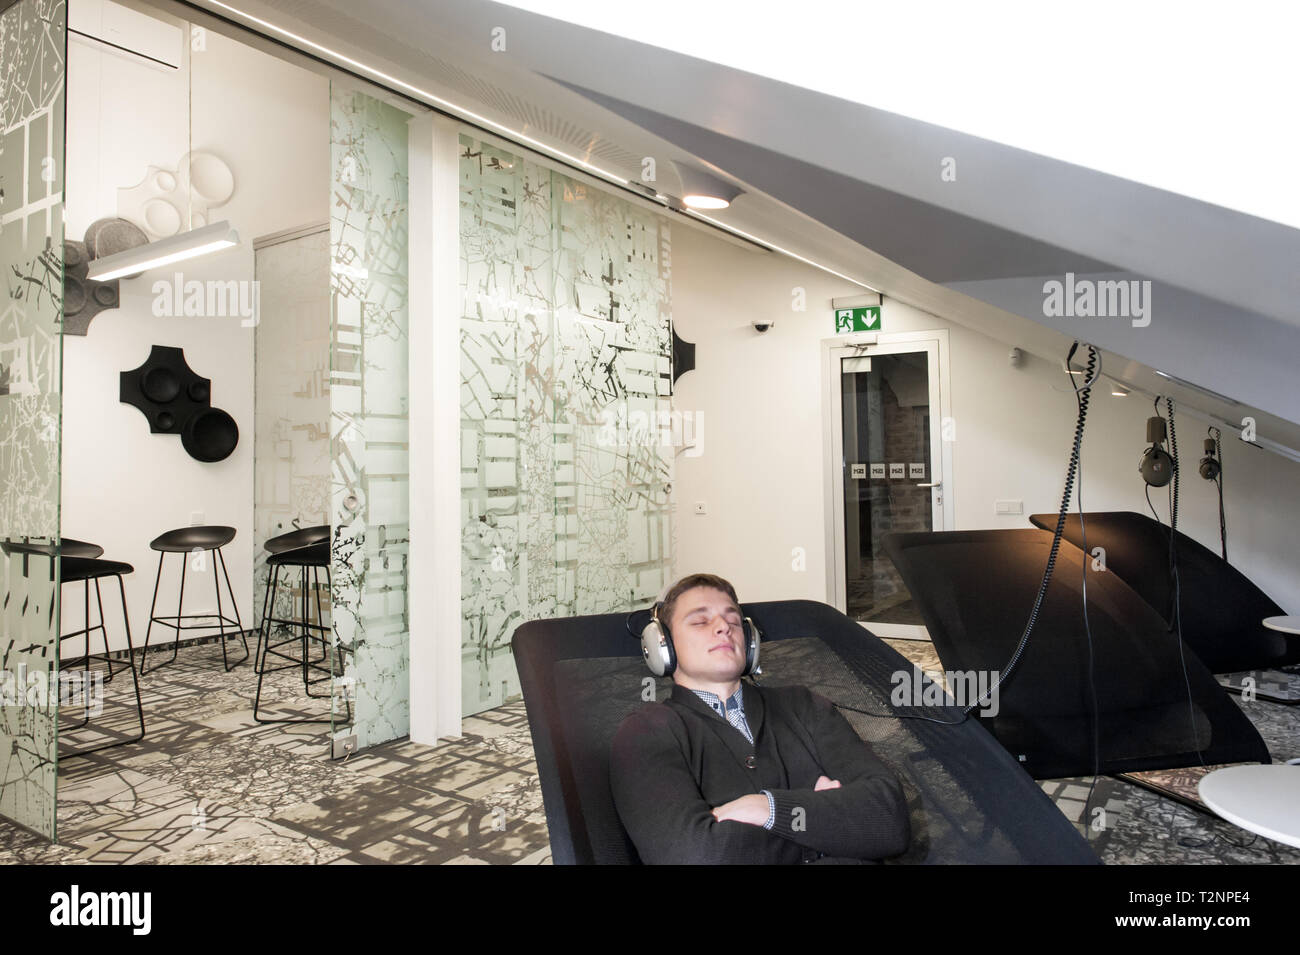 A young white man relaxes listening to music in a business environment. Stock Photo